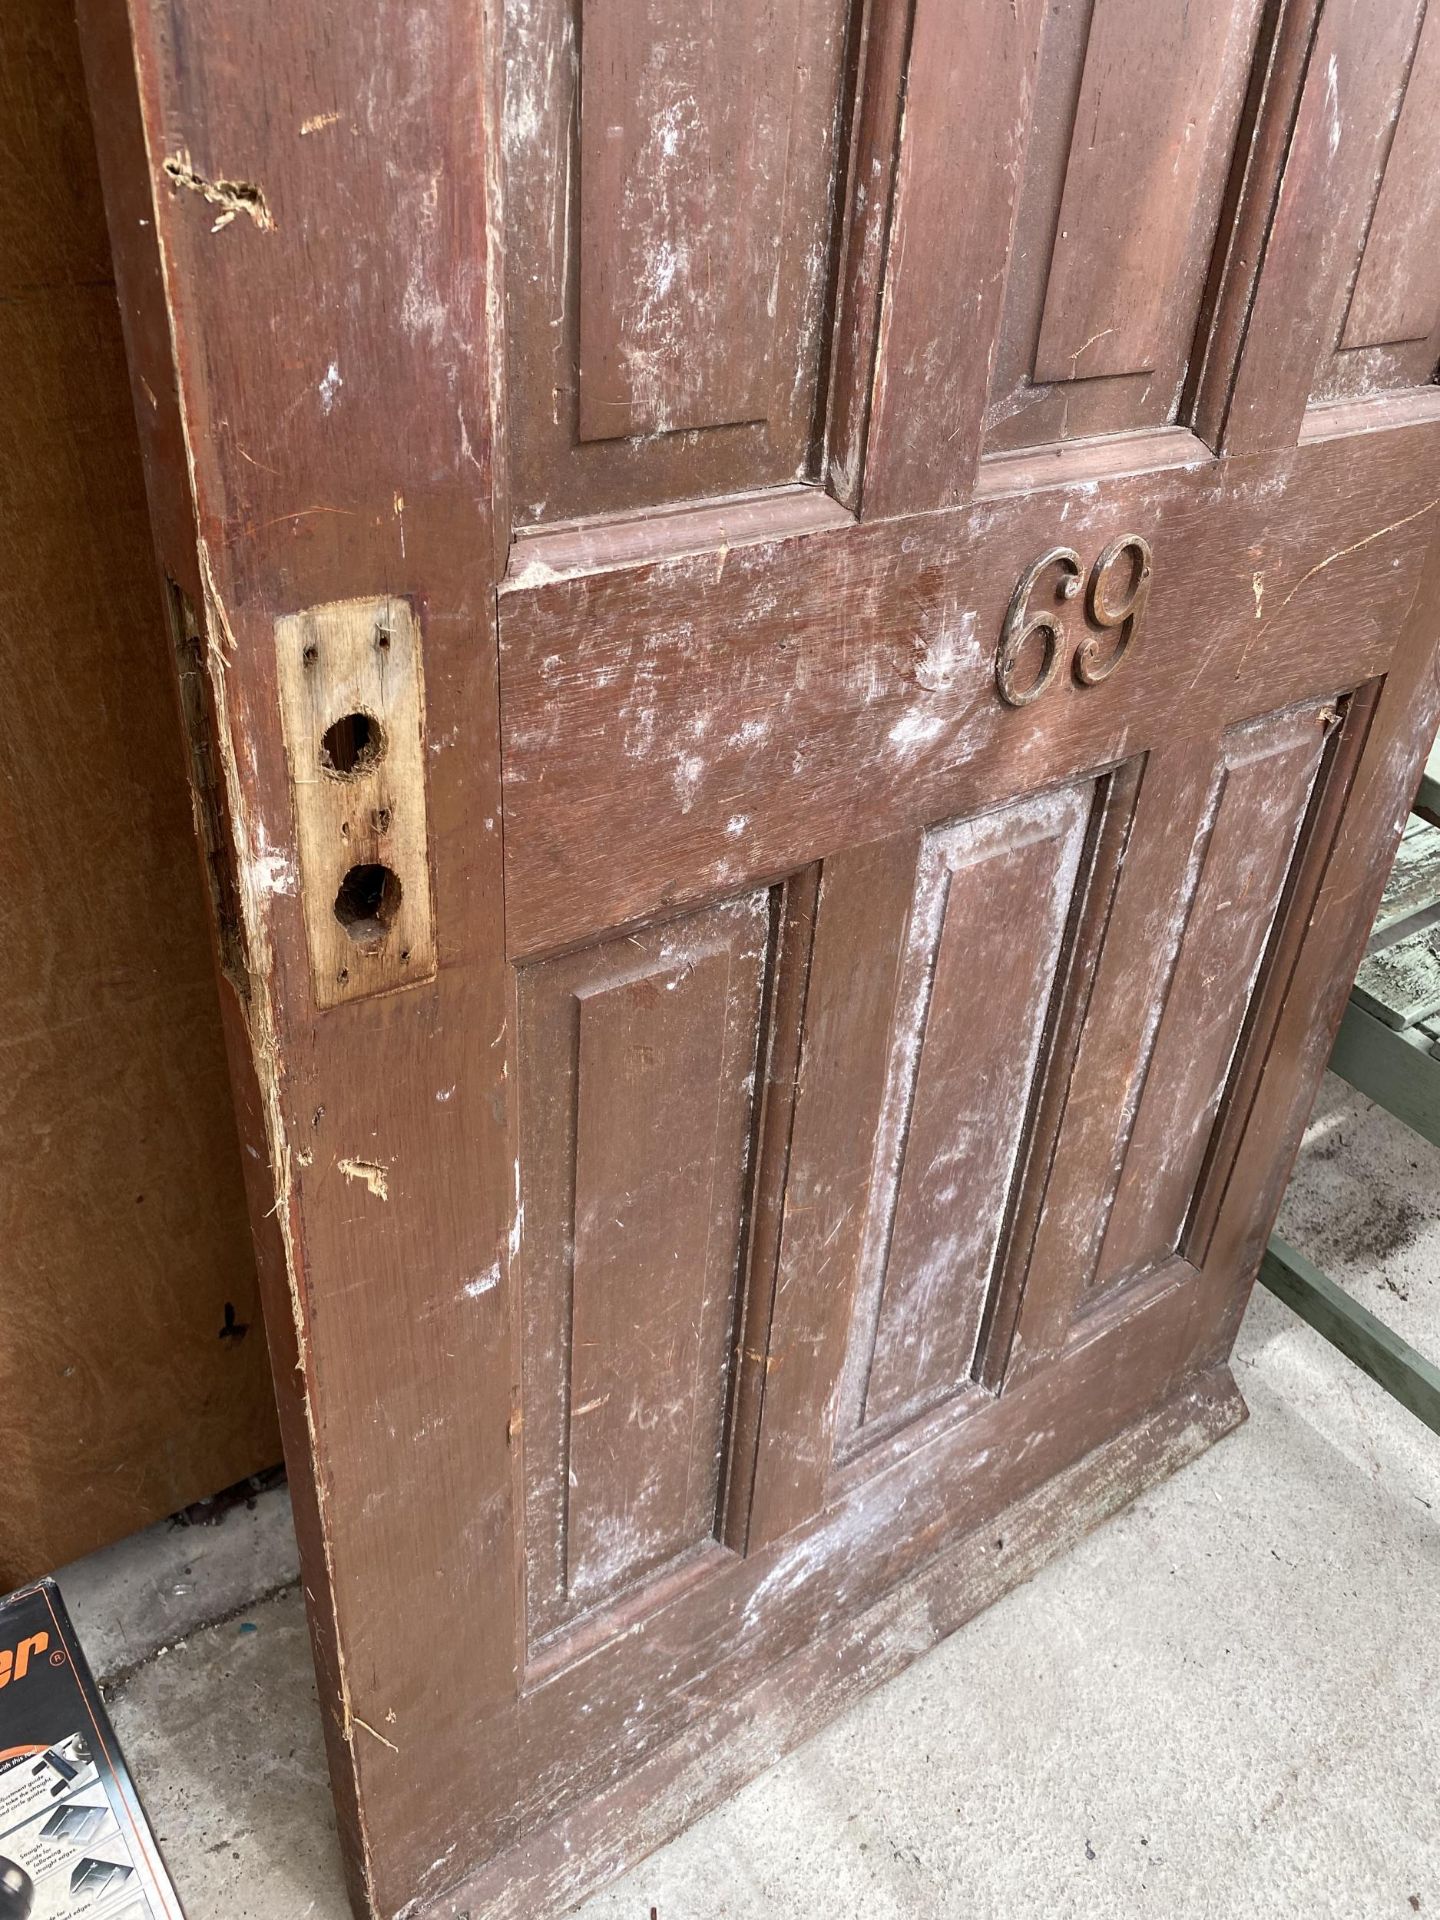 A WOODEN HOUSE DOOR WITH LEADED WINDOW AND NUMBERED 69 - Image 3 of 3